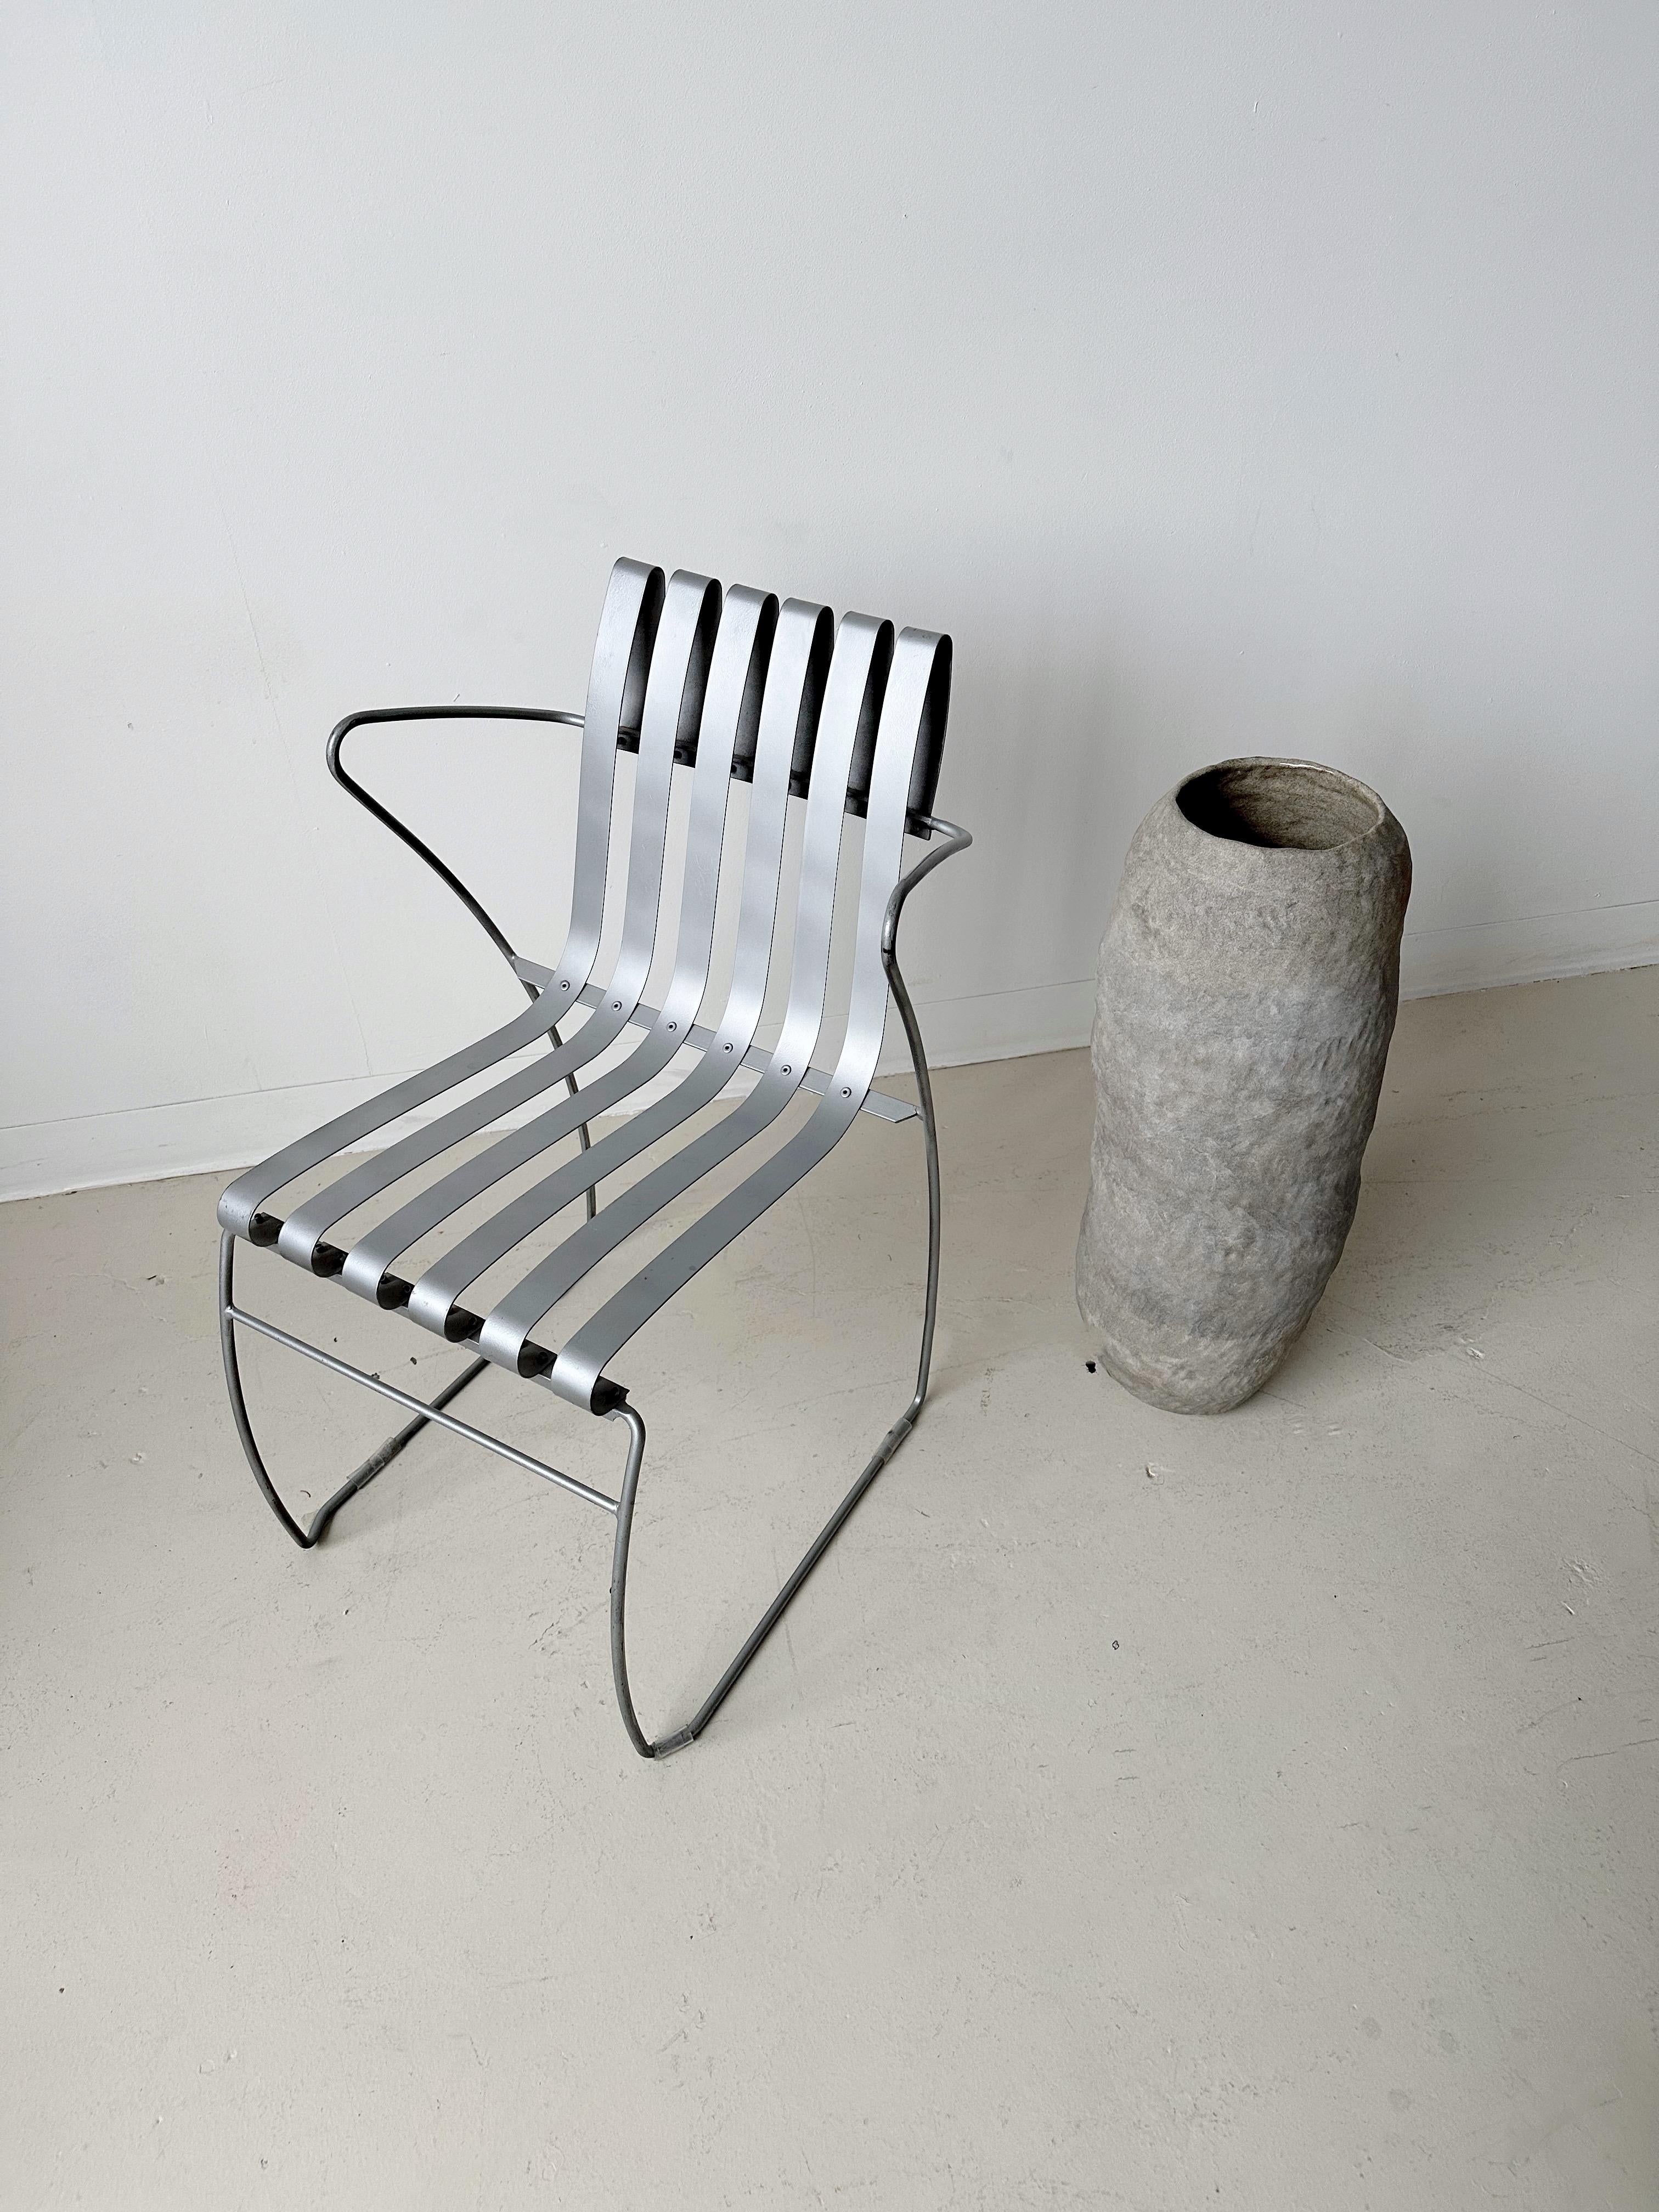 Handmade Sculptural Powder Coated Steel Chair For Sale 2